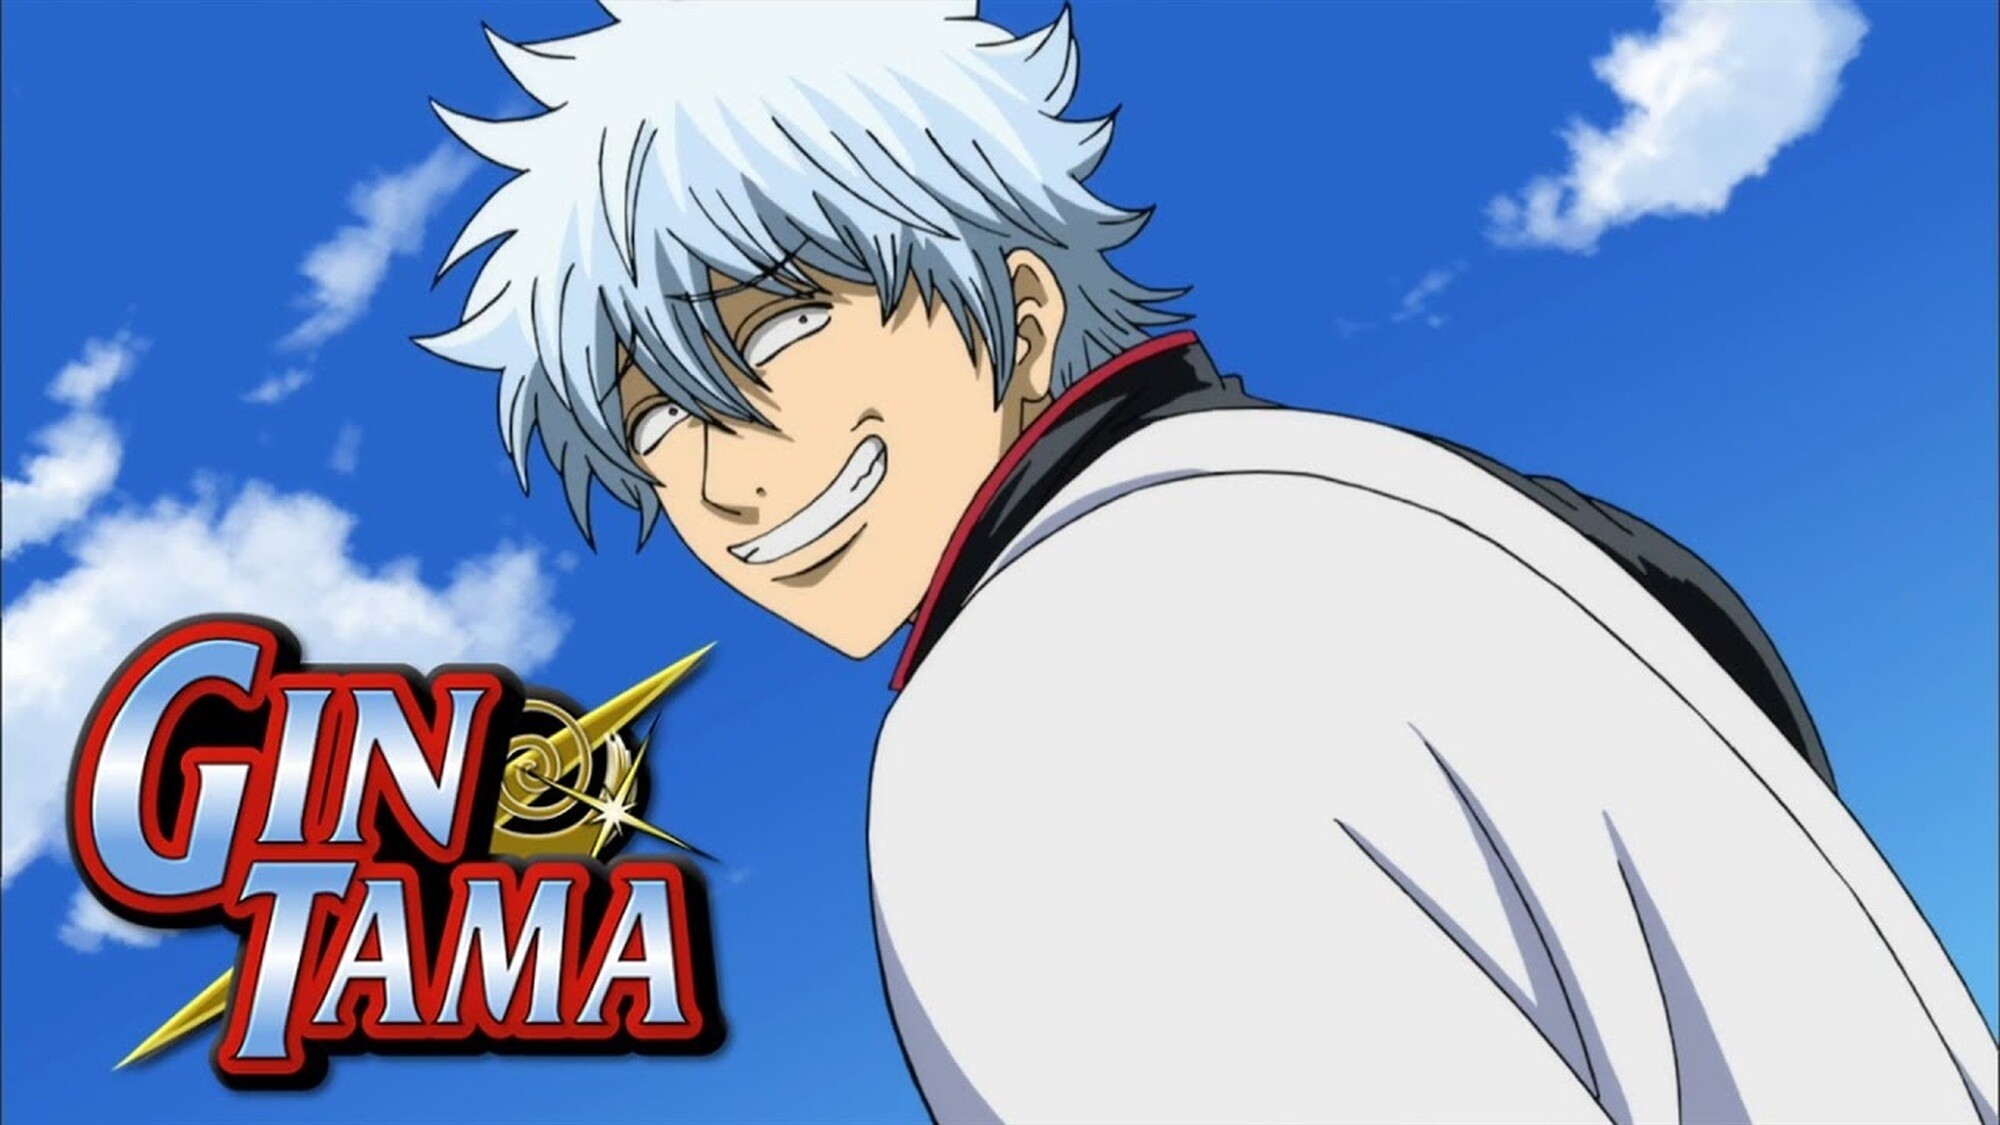 Gintama (TV Series): A story of a handyman named Gintoki, A samurai with no respect for rules set by the invaders. 2000x1130 HD Wallpaper.